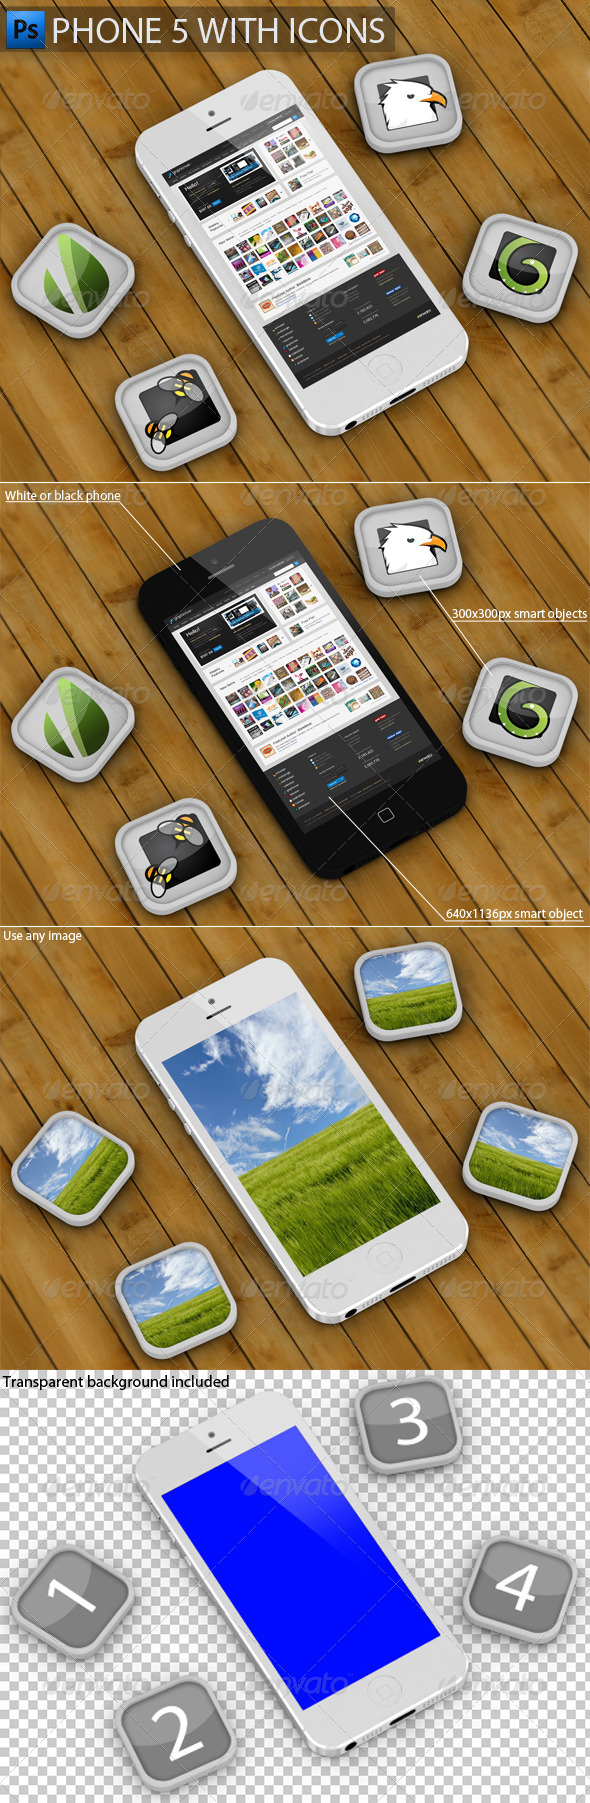 Download Phone 5 with Icons Mockup | GraphicRiver